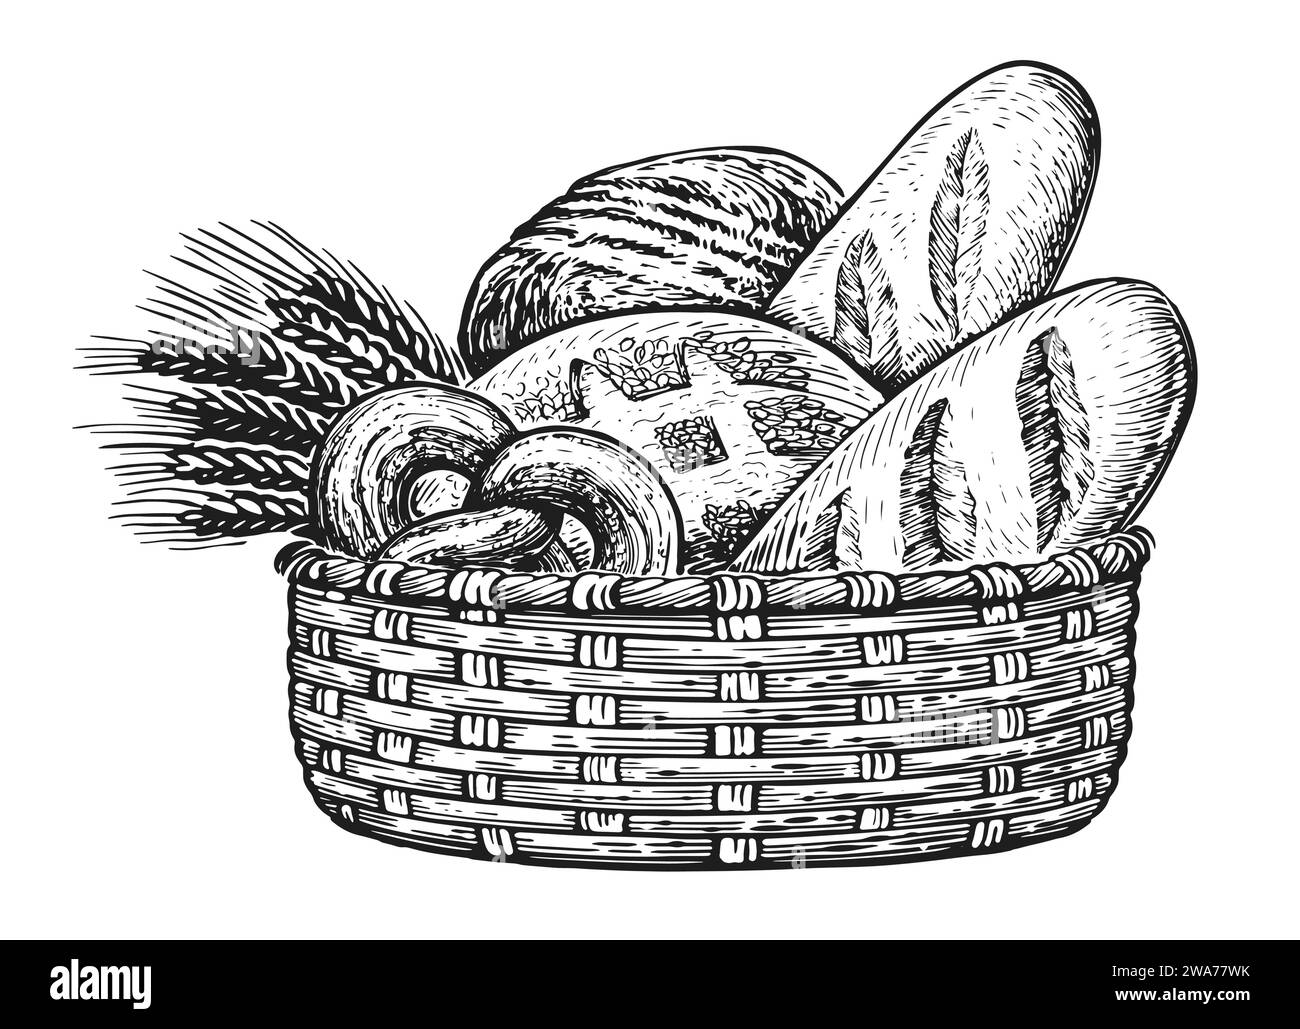 Fresh baked goods in basket. Bread and ears of wheat sketch vintage illustration Stock Vector